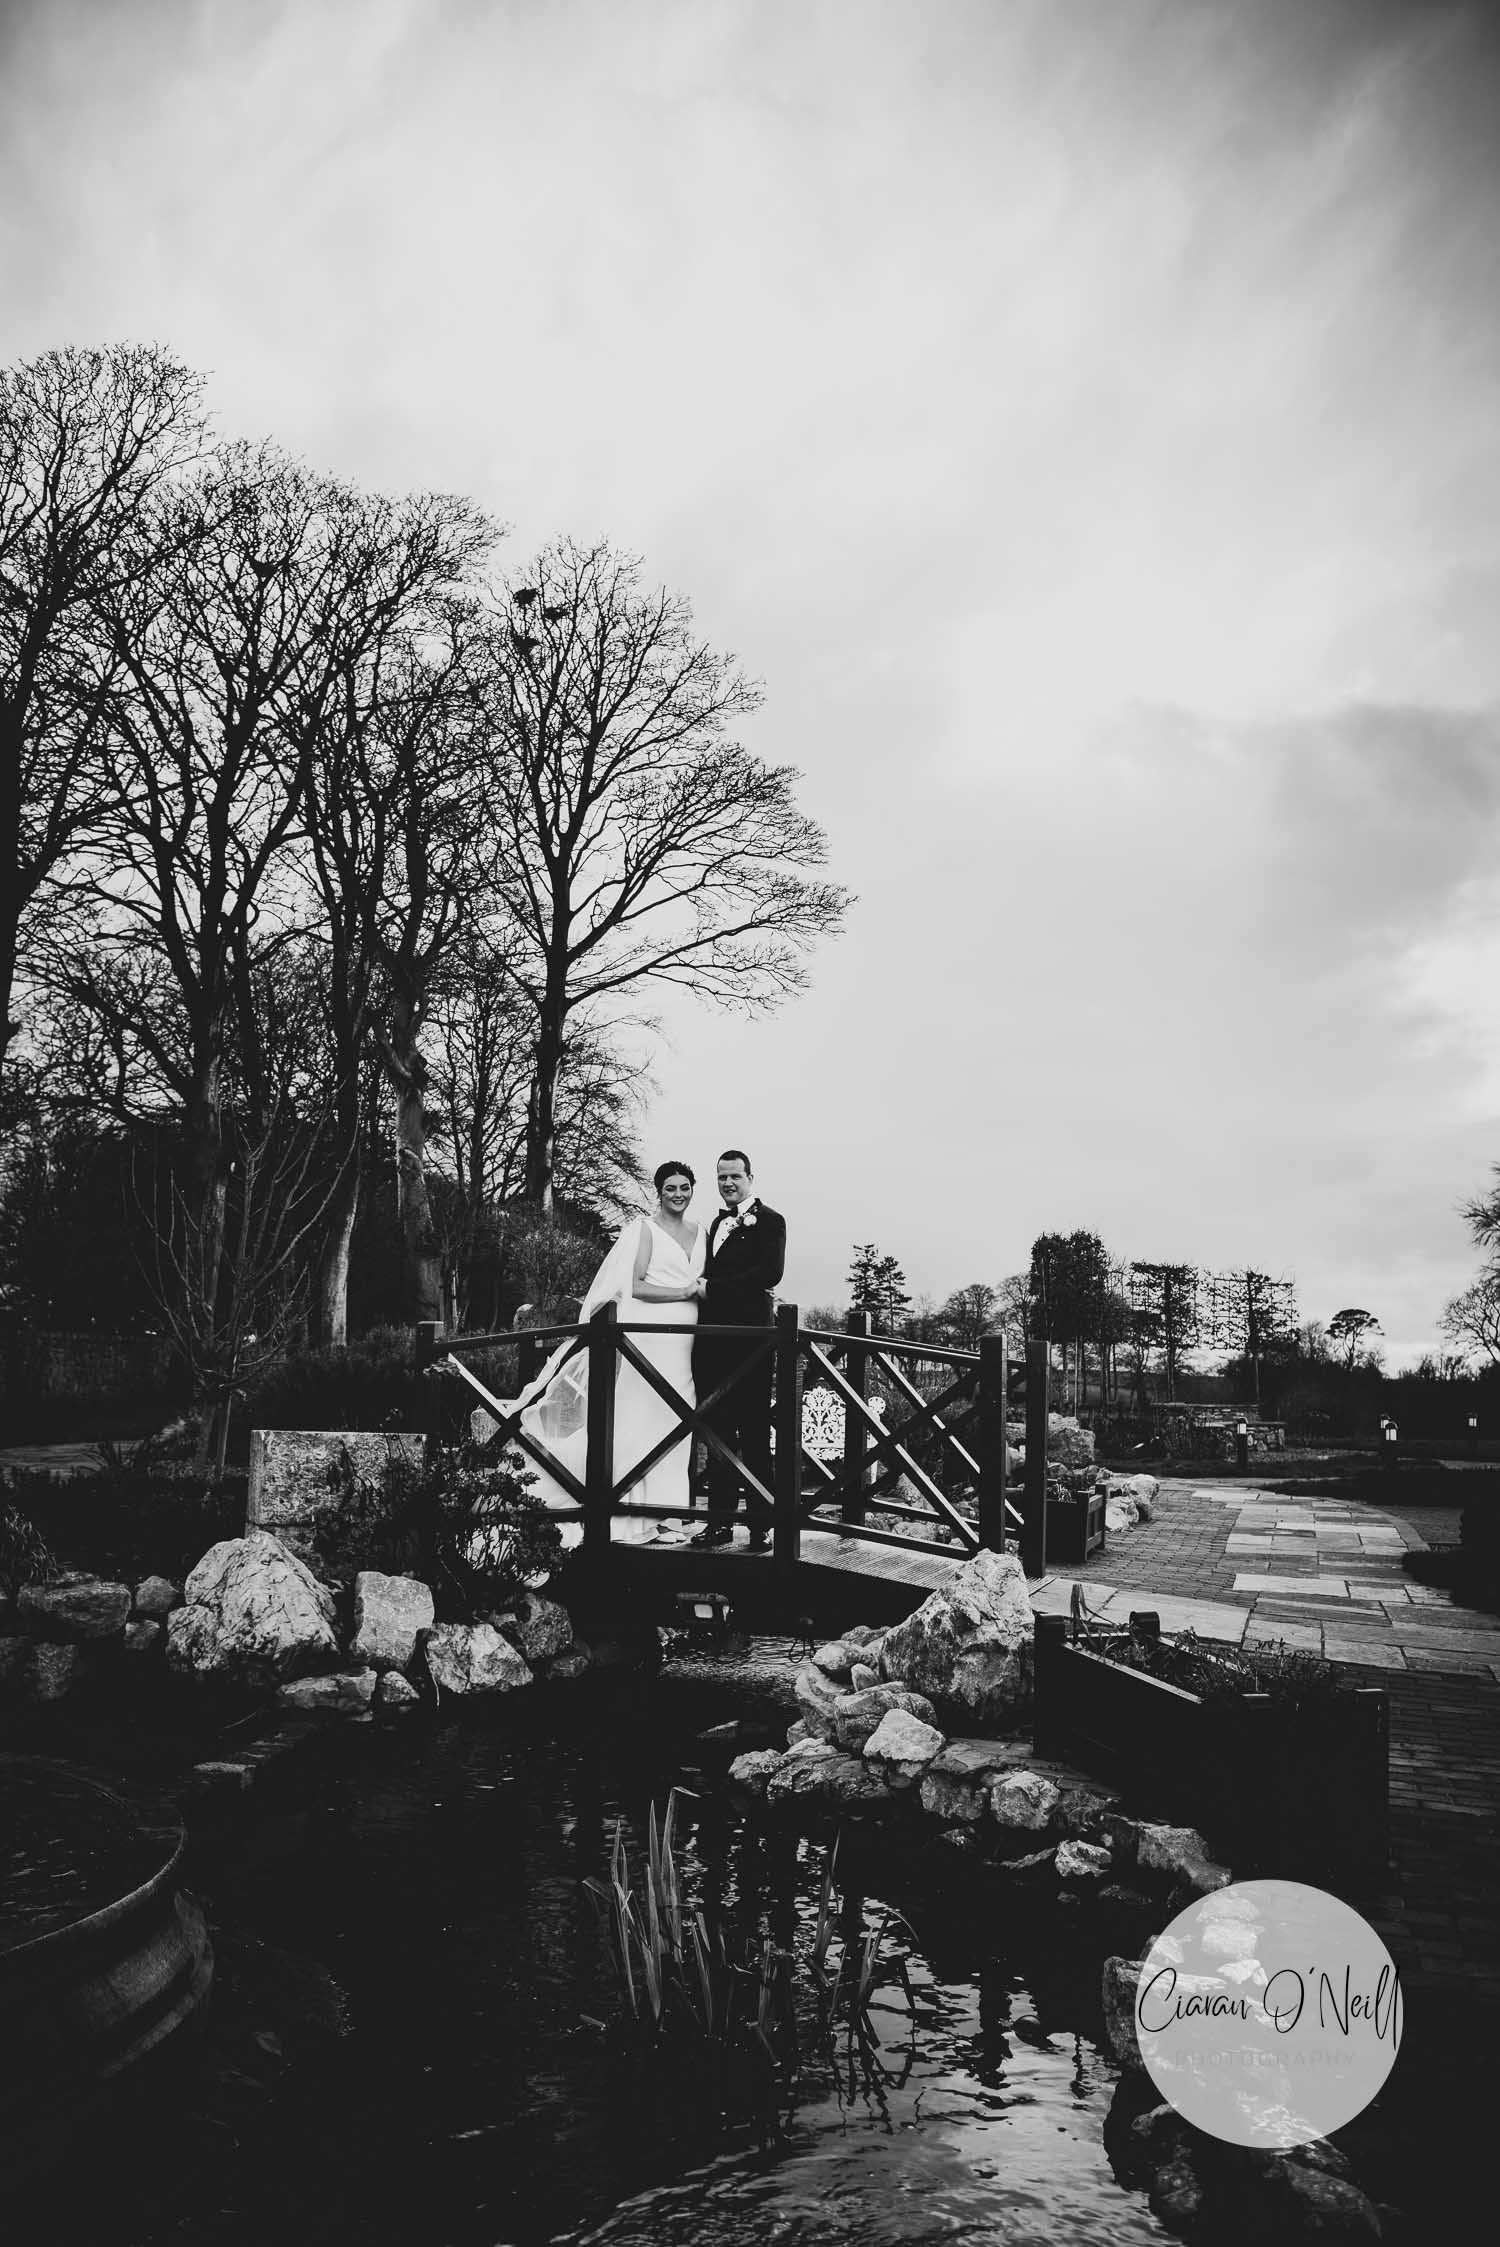 Bride and groom standing on a country style bridge with water in the foreground